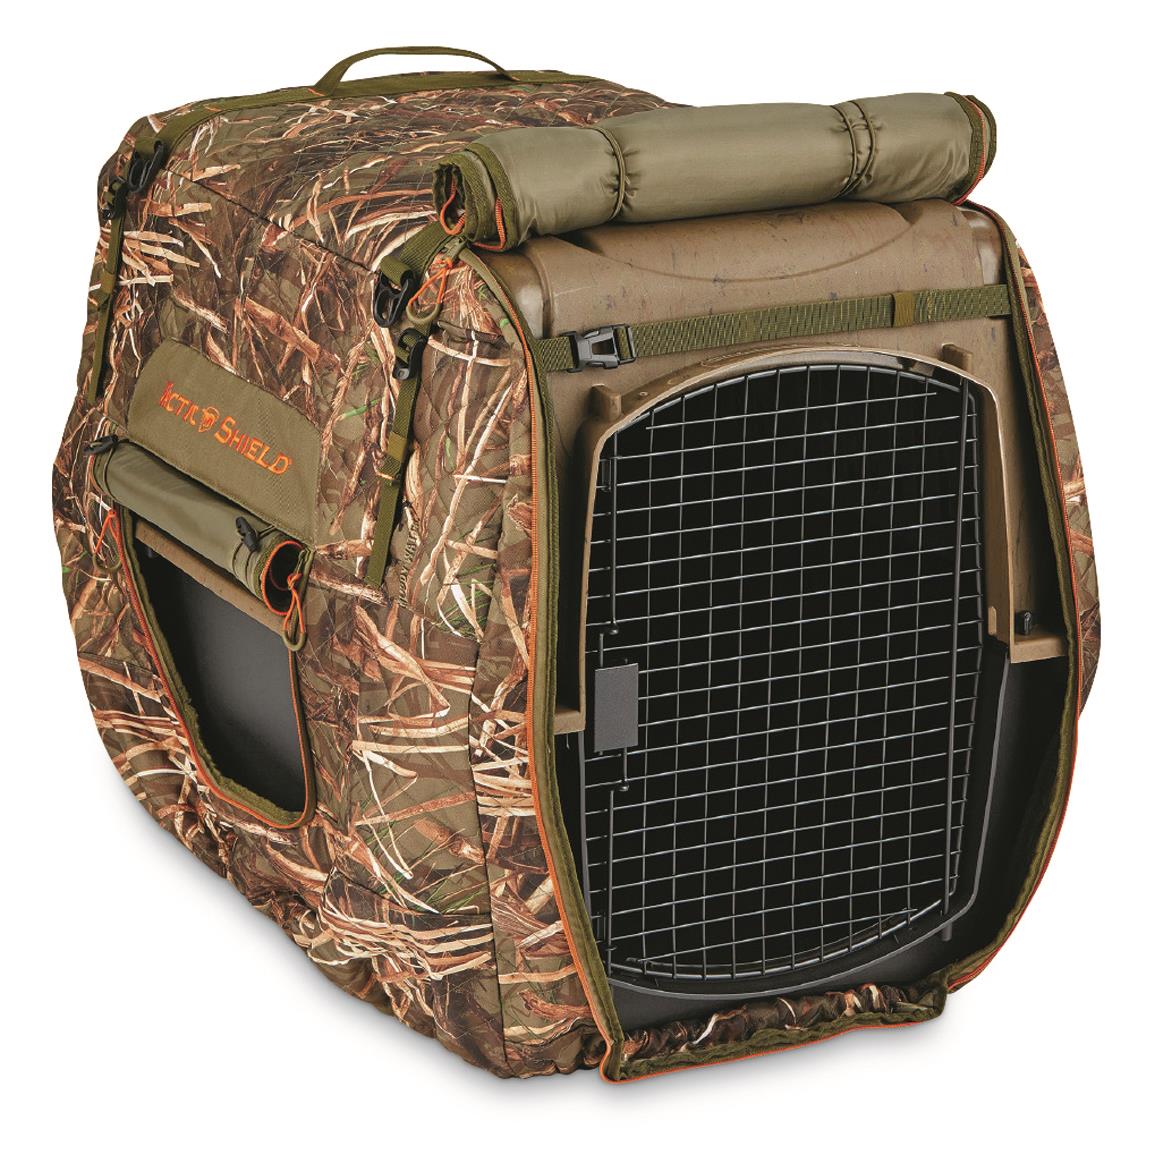 ArcticShield Insulated Kennel Cover, Muddy Water Flooded Field